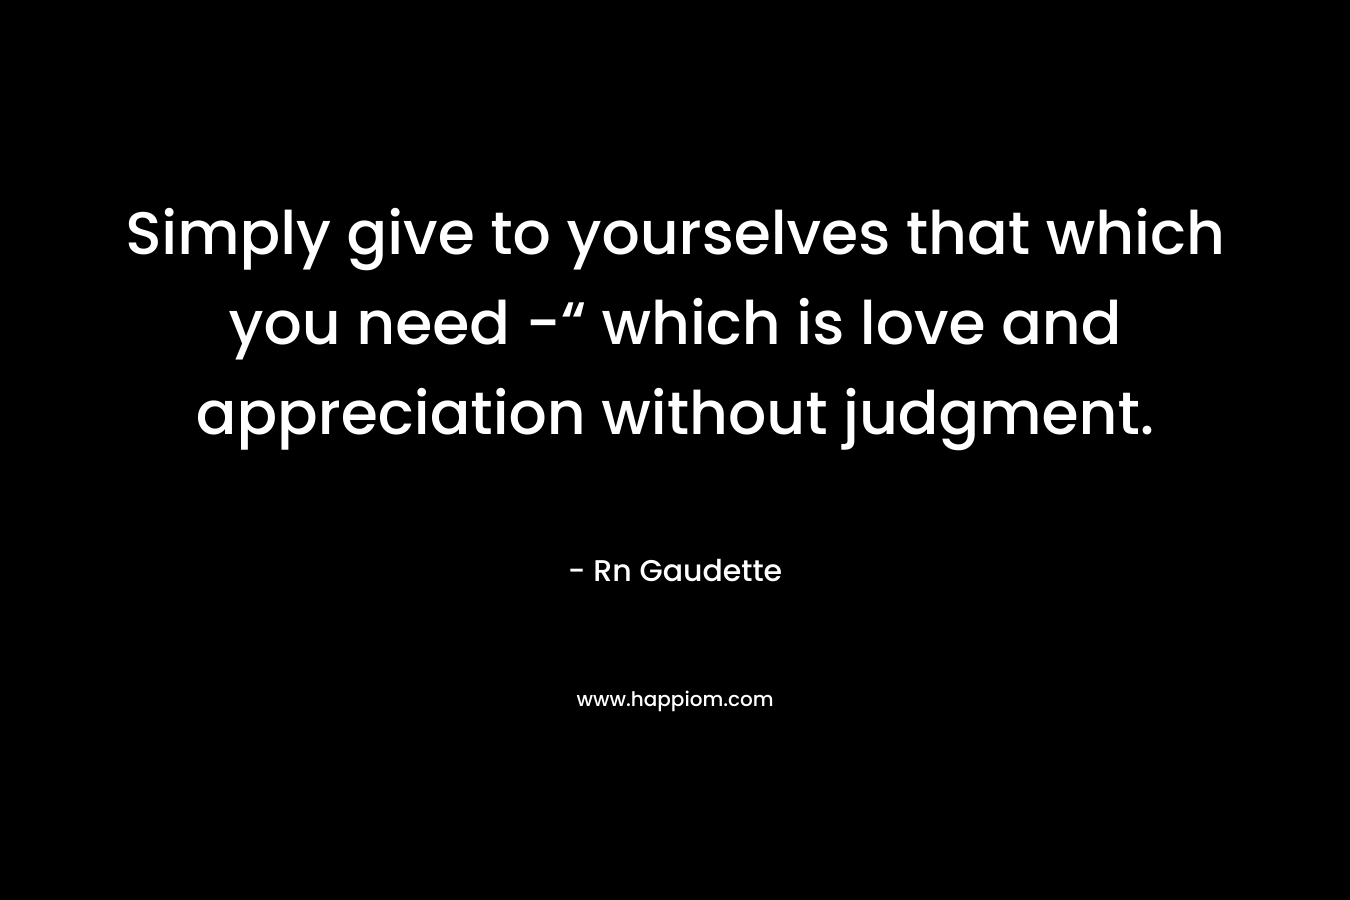 Simply give to yourselves that which you need -“ which is love and appreciation without judgment. – Rn Gaudette